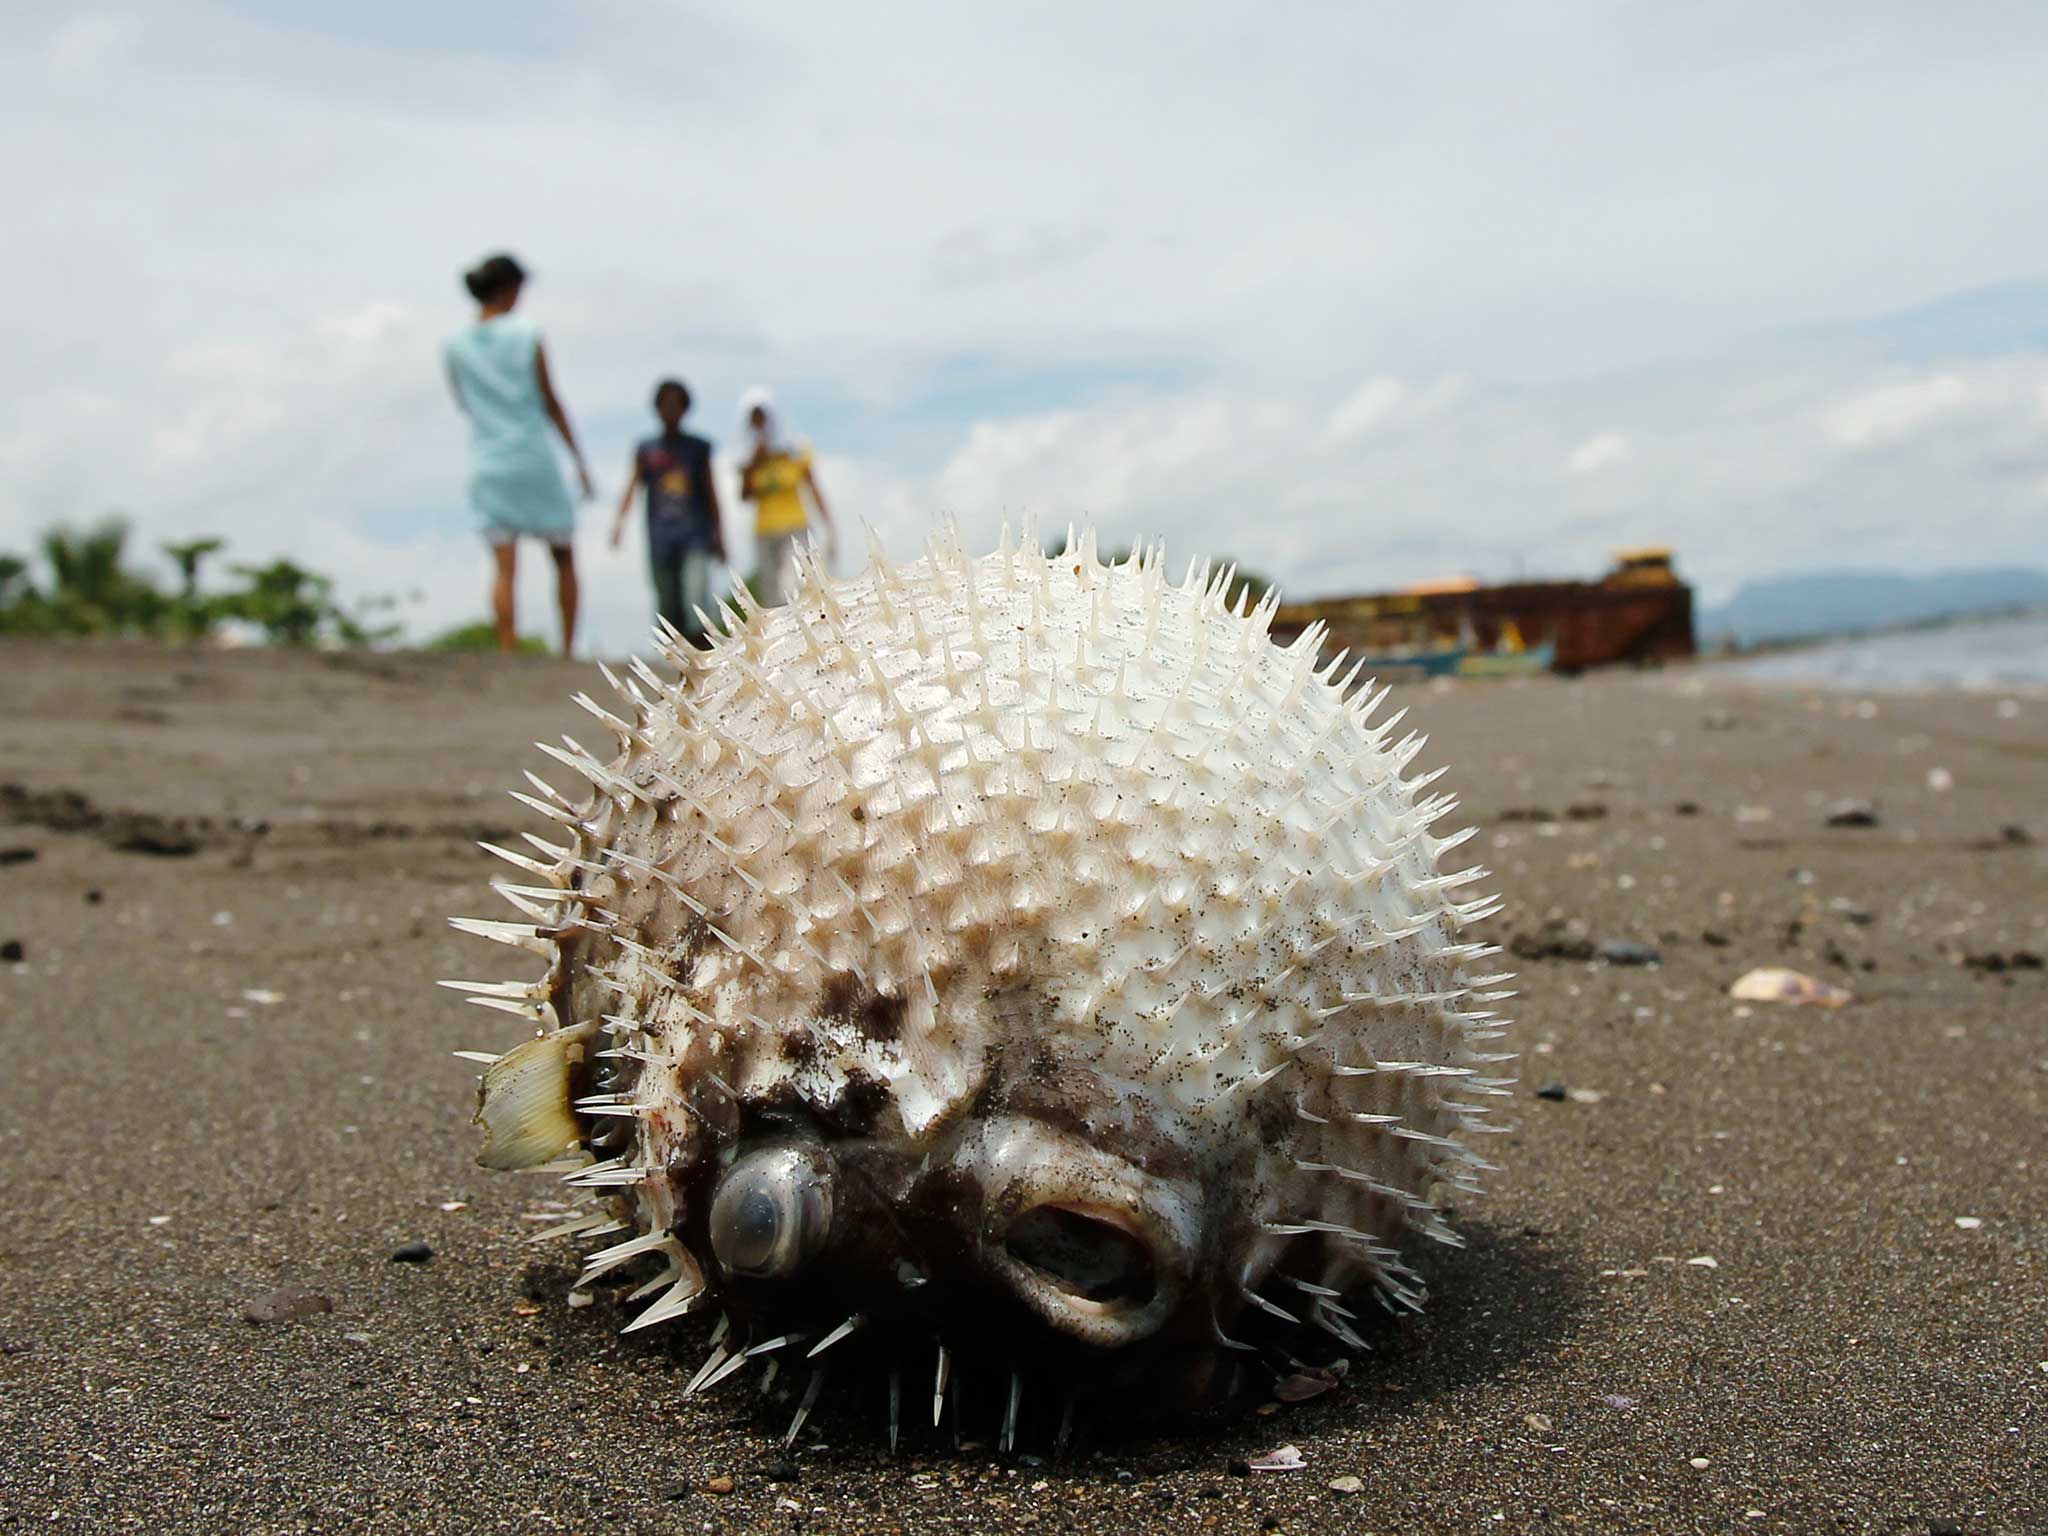 Eleven members of same family hospitalised after eating deadly pufferfish  The Independent